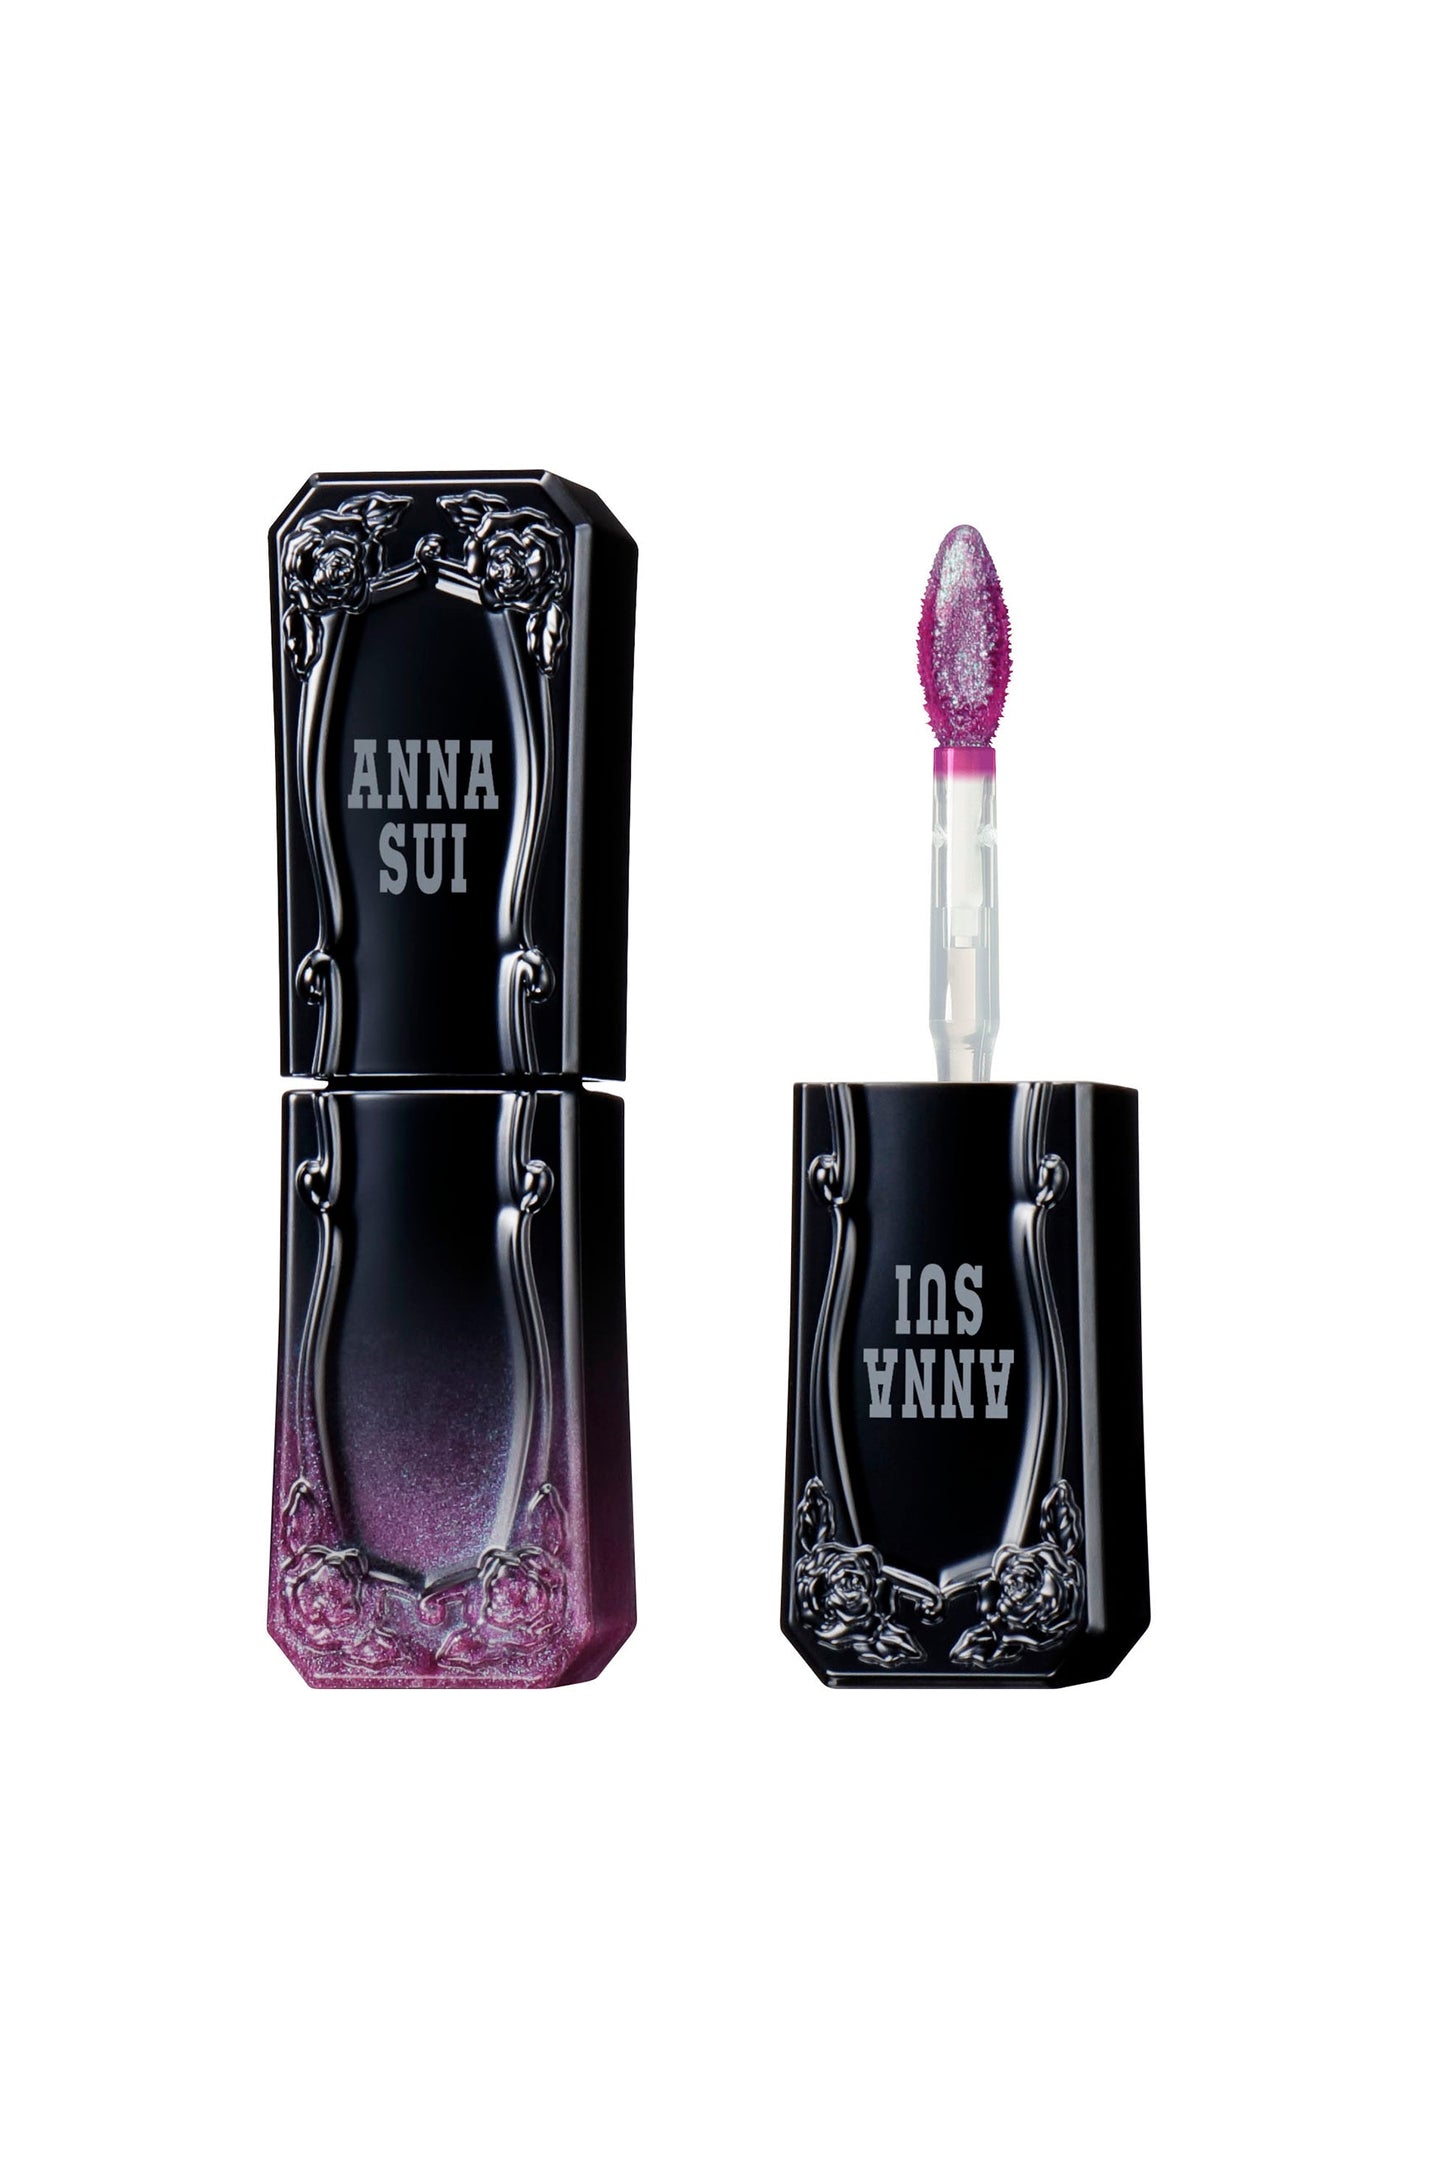 Limited-edition lip tint black high container lilac pearl bottom and a floral design in each corner